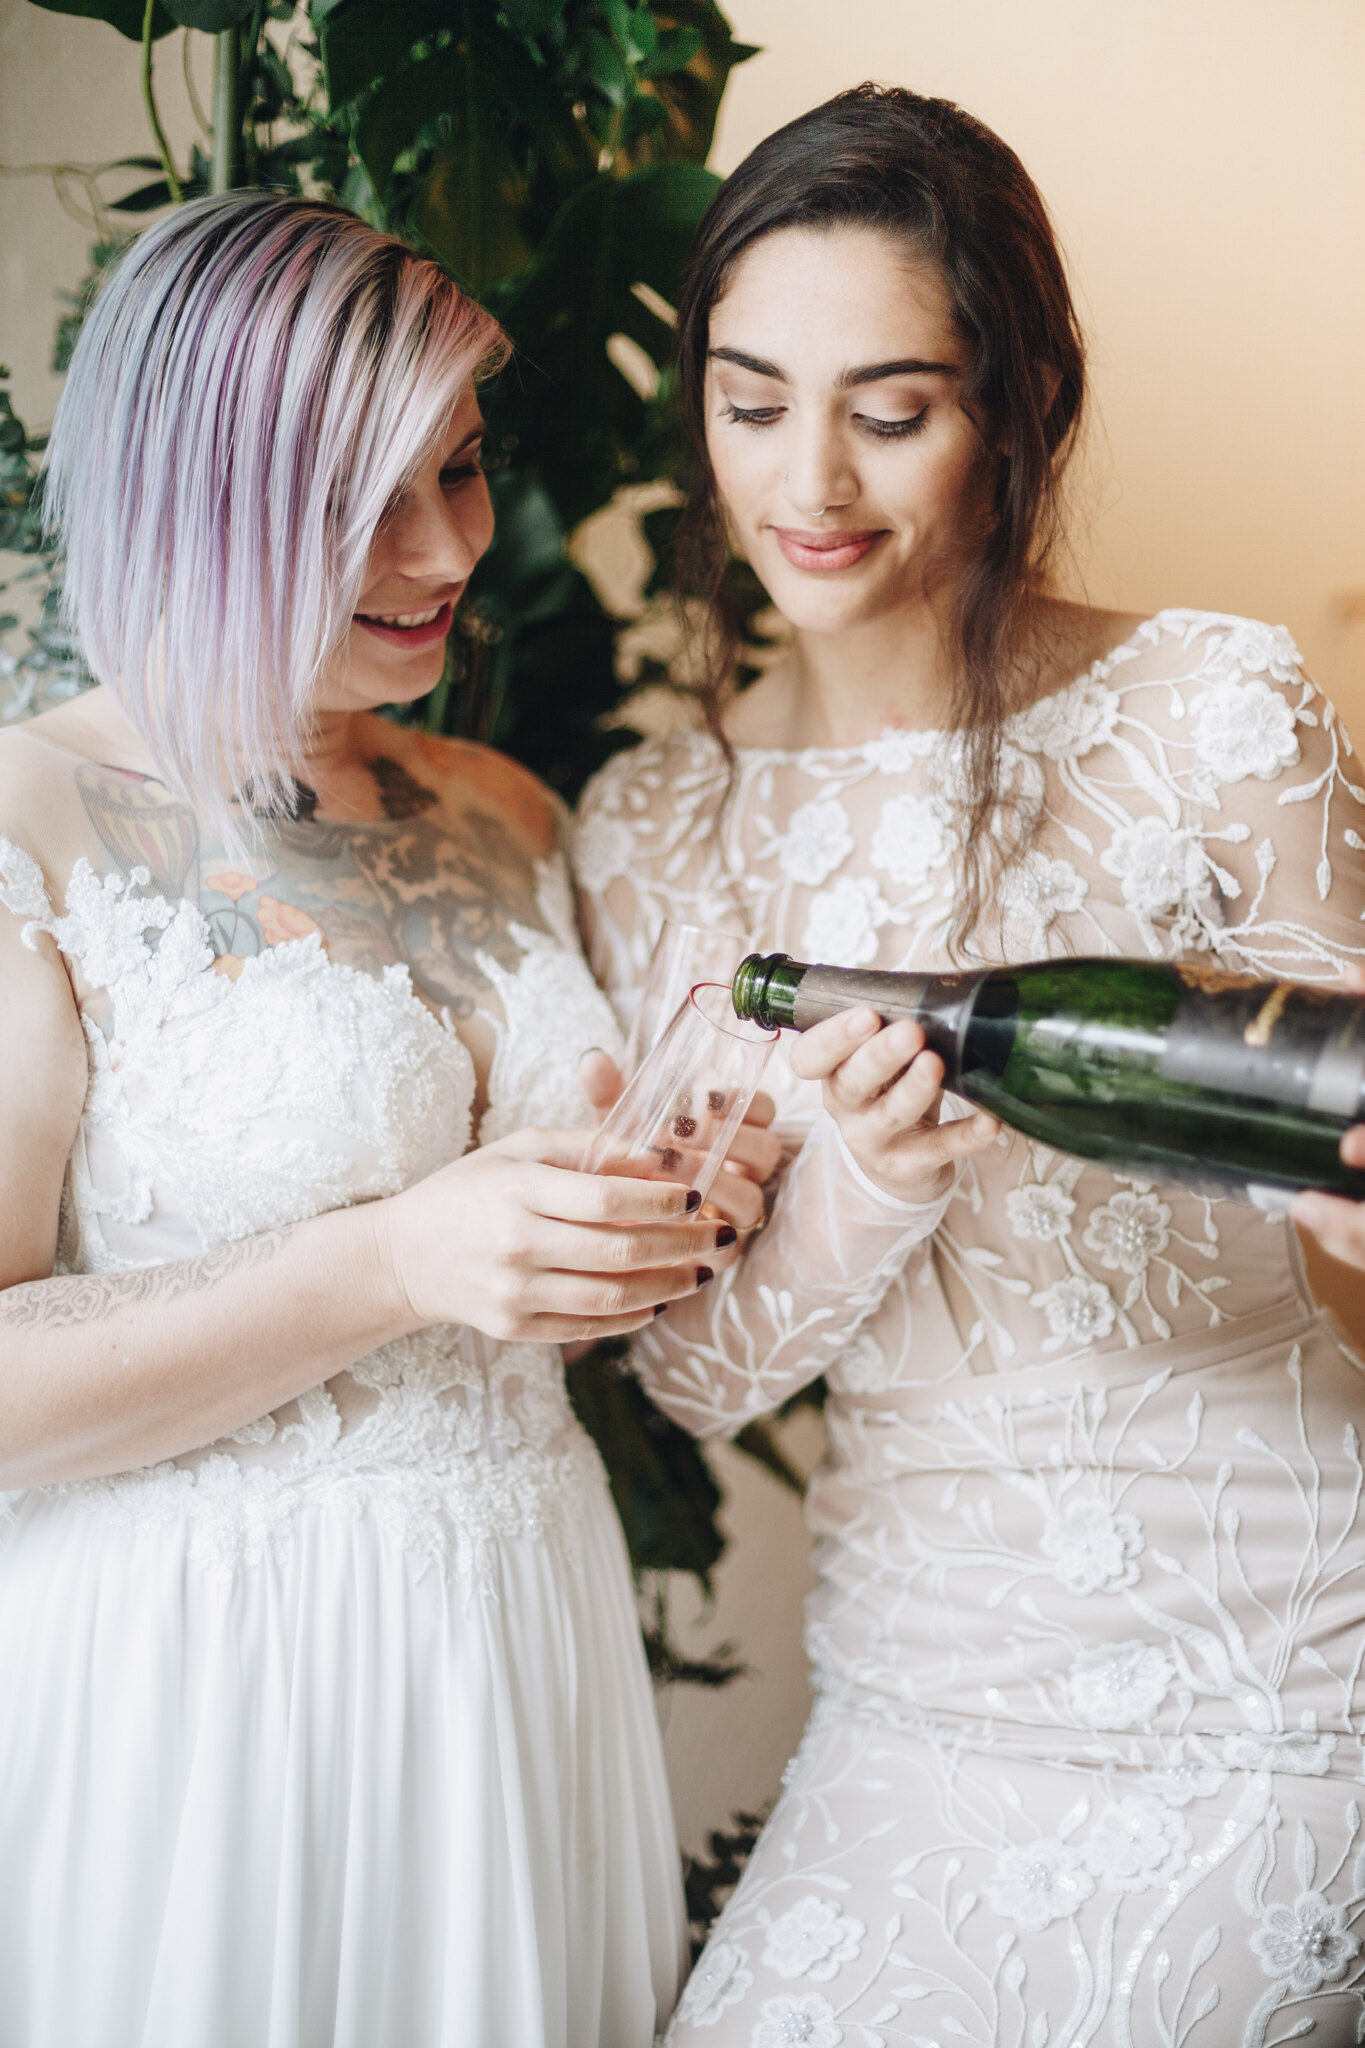 A woman pours champagne into another' woman's glass